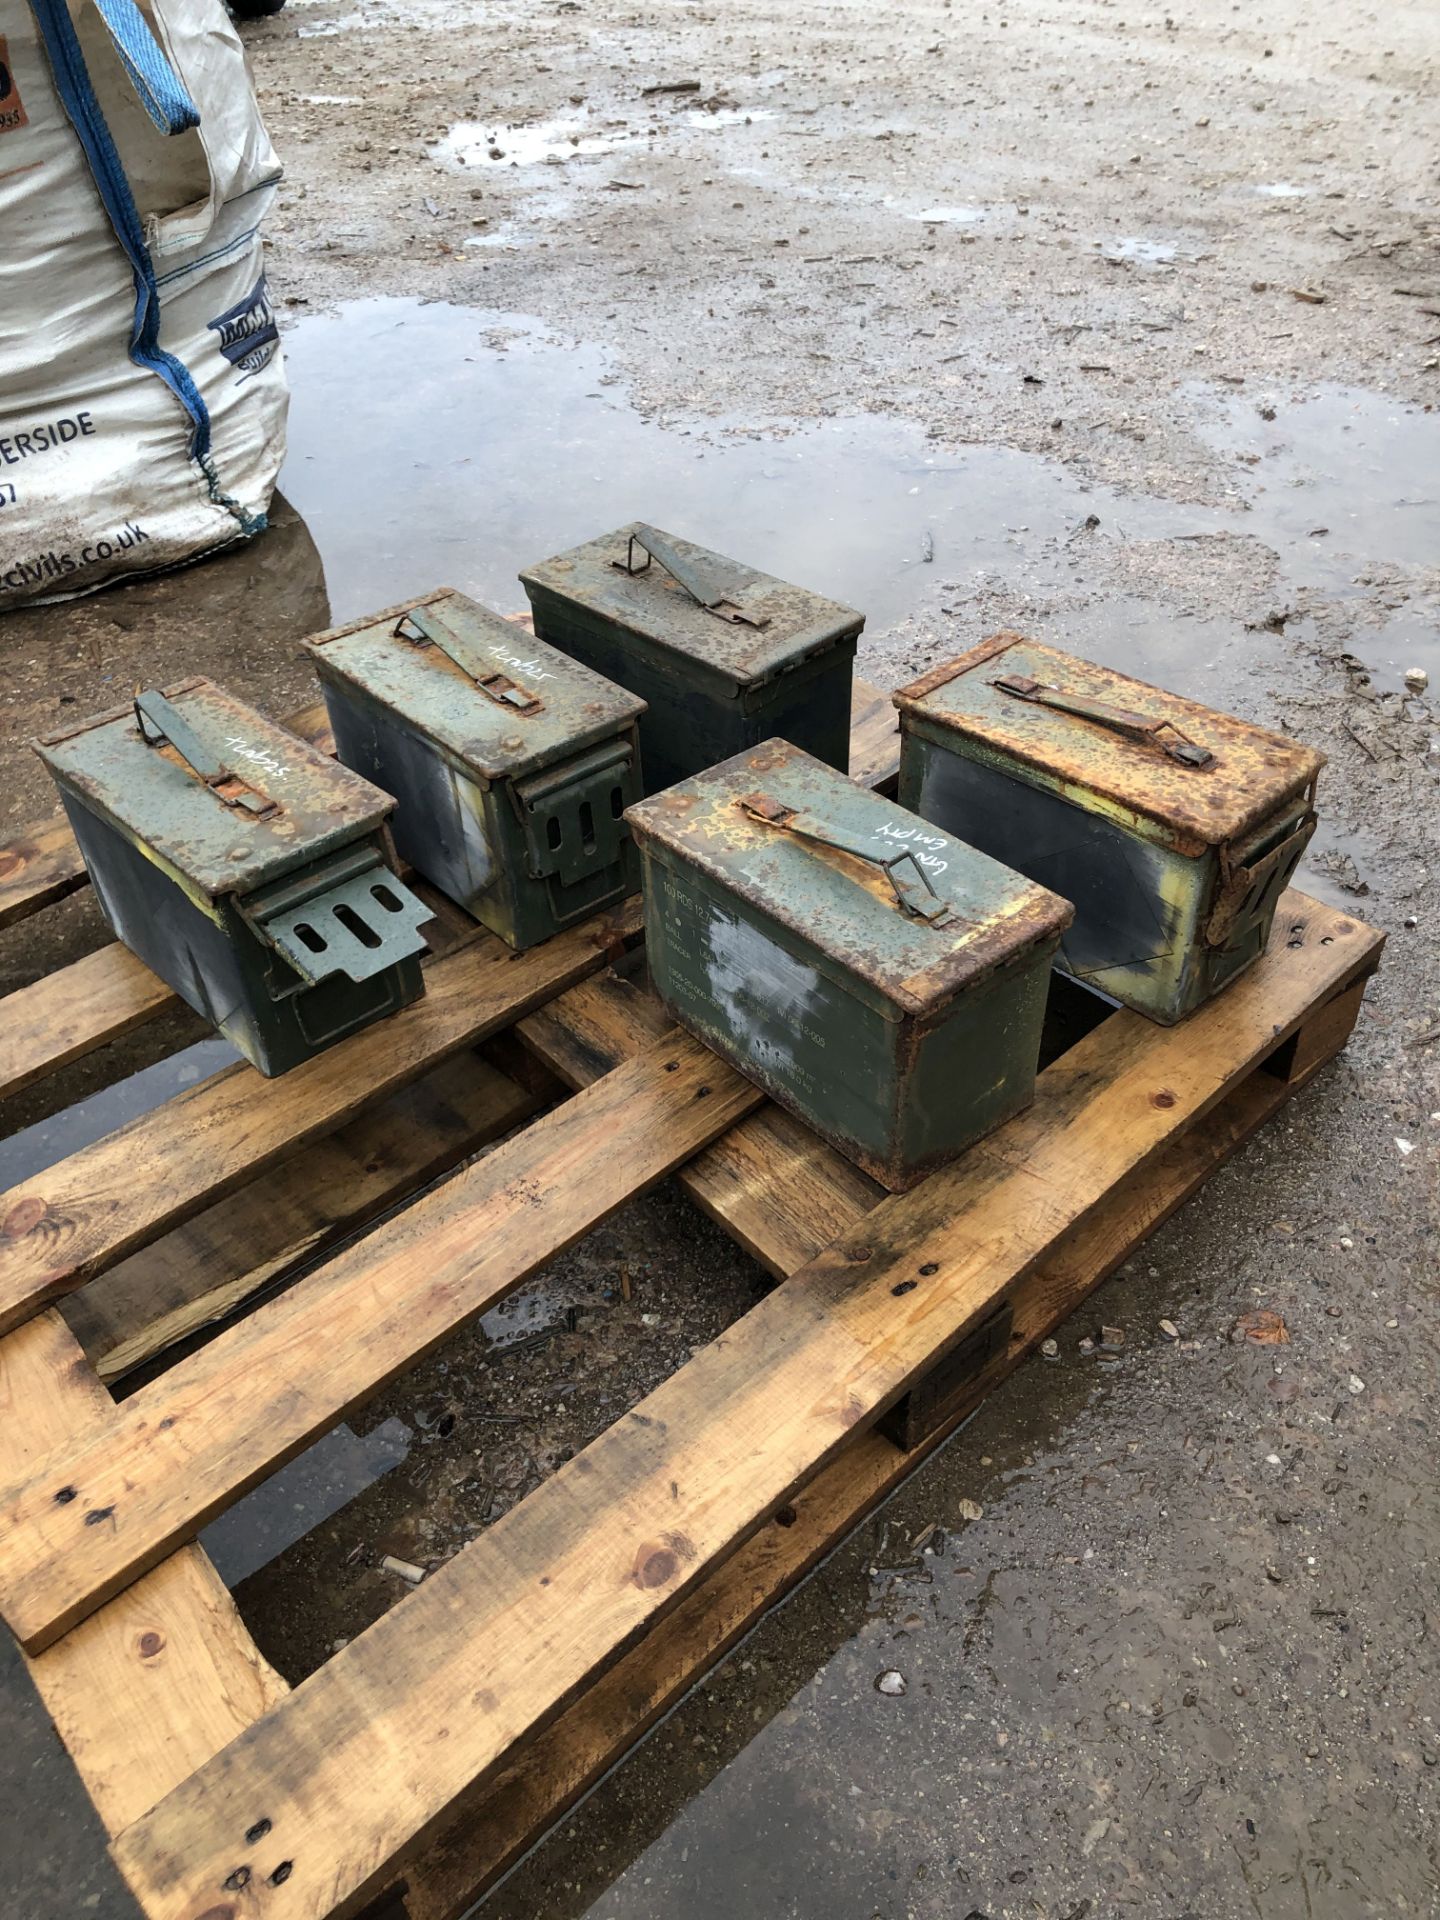 Five Steel Ammo Boxes, each approx. 300mm x 160mm x 190mm deep